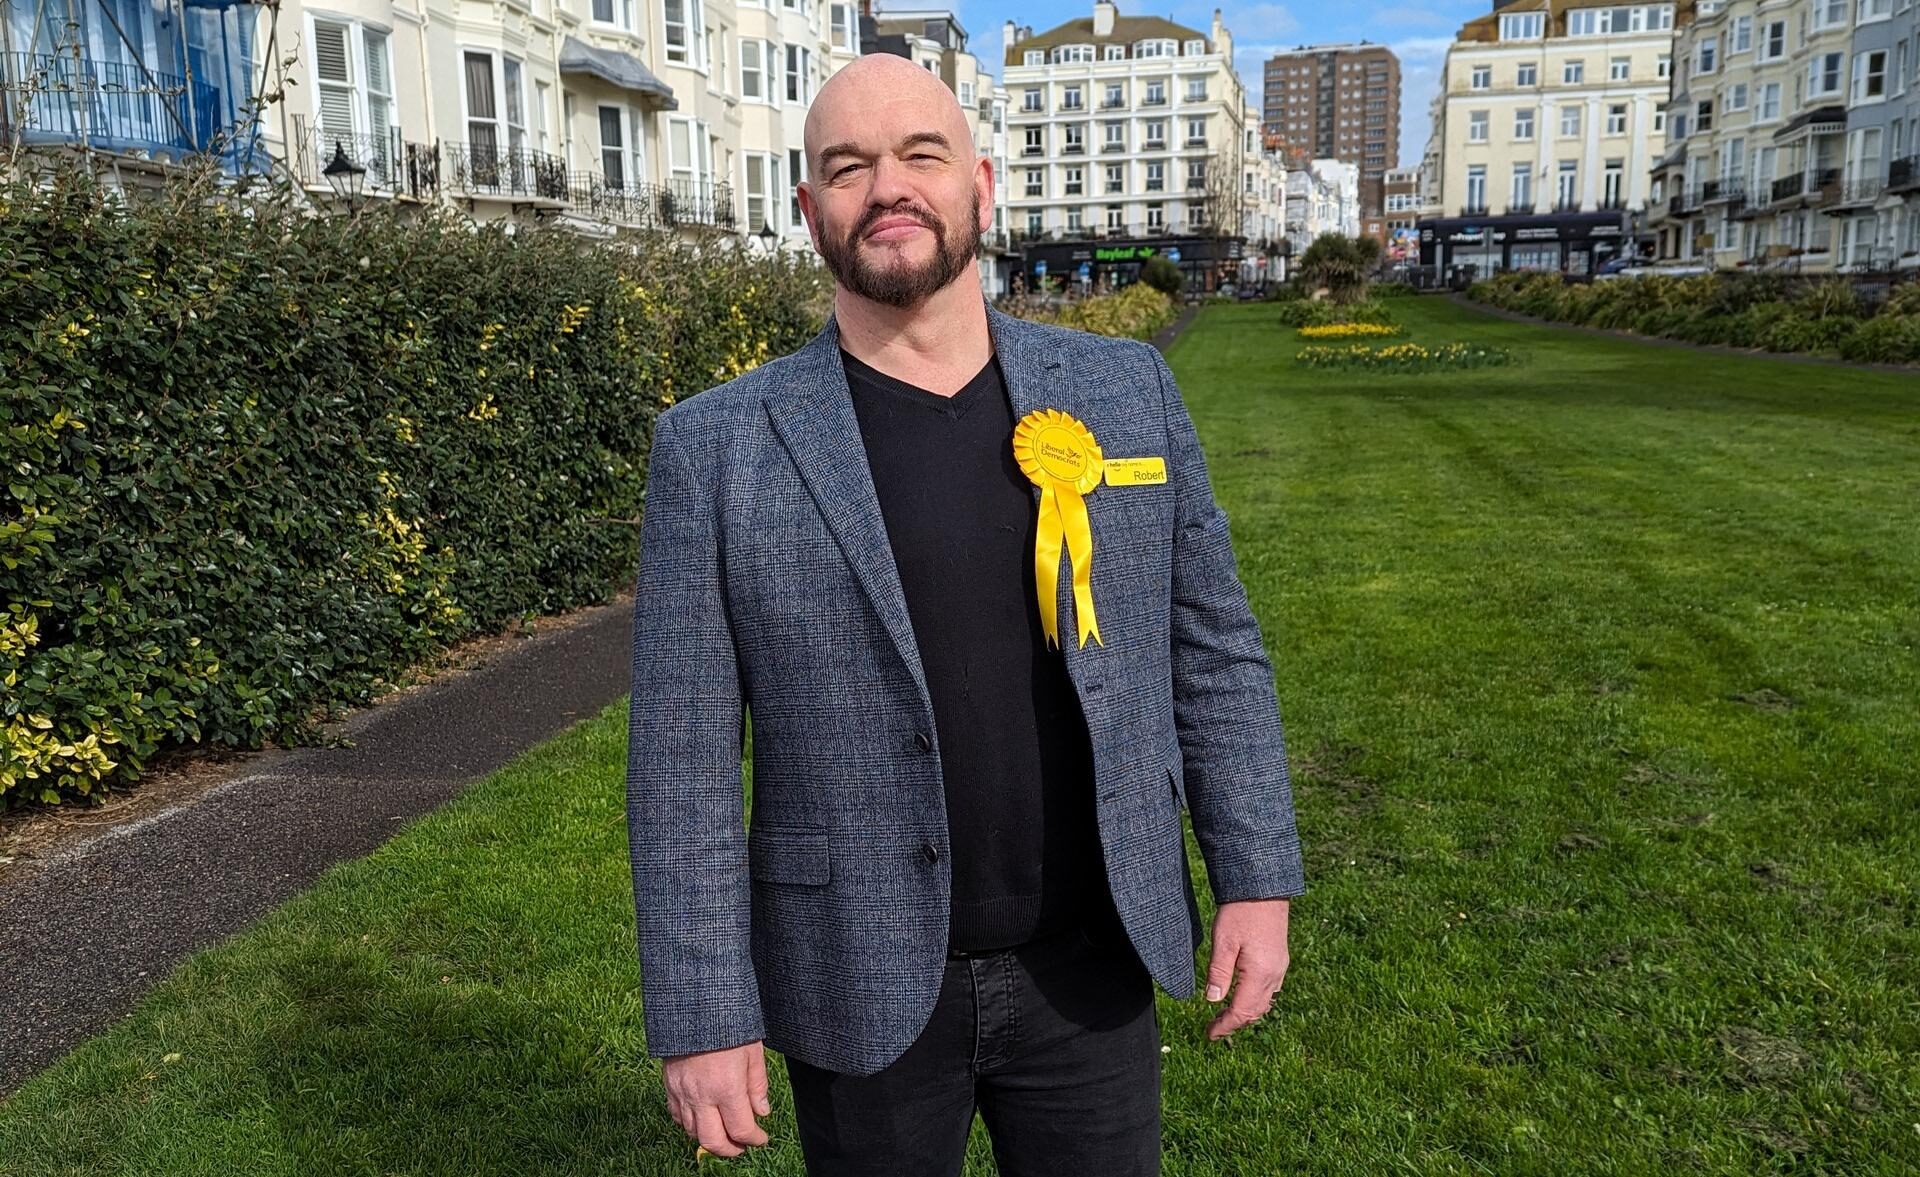 OPINION: Robert Brown, a gay man selected as Liberal Democrat candidate for Kemptown Ward by-election, talks to Scene